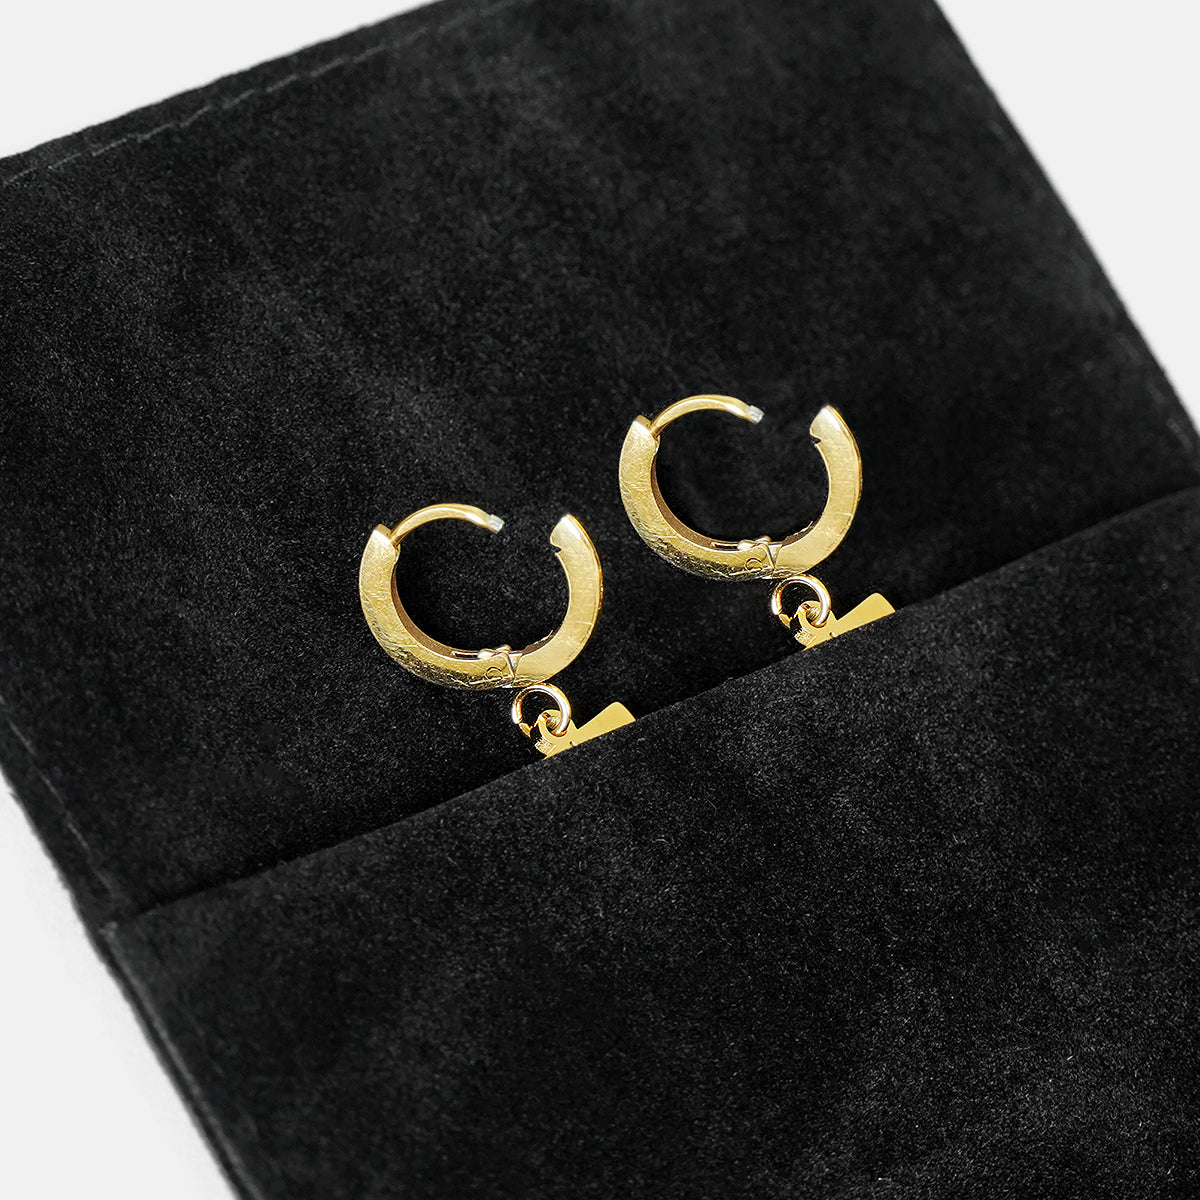 45 Number Earring - Gold Plated Stainless Steel